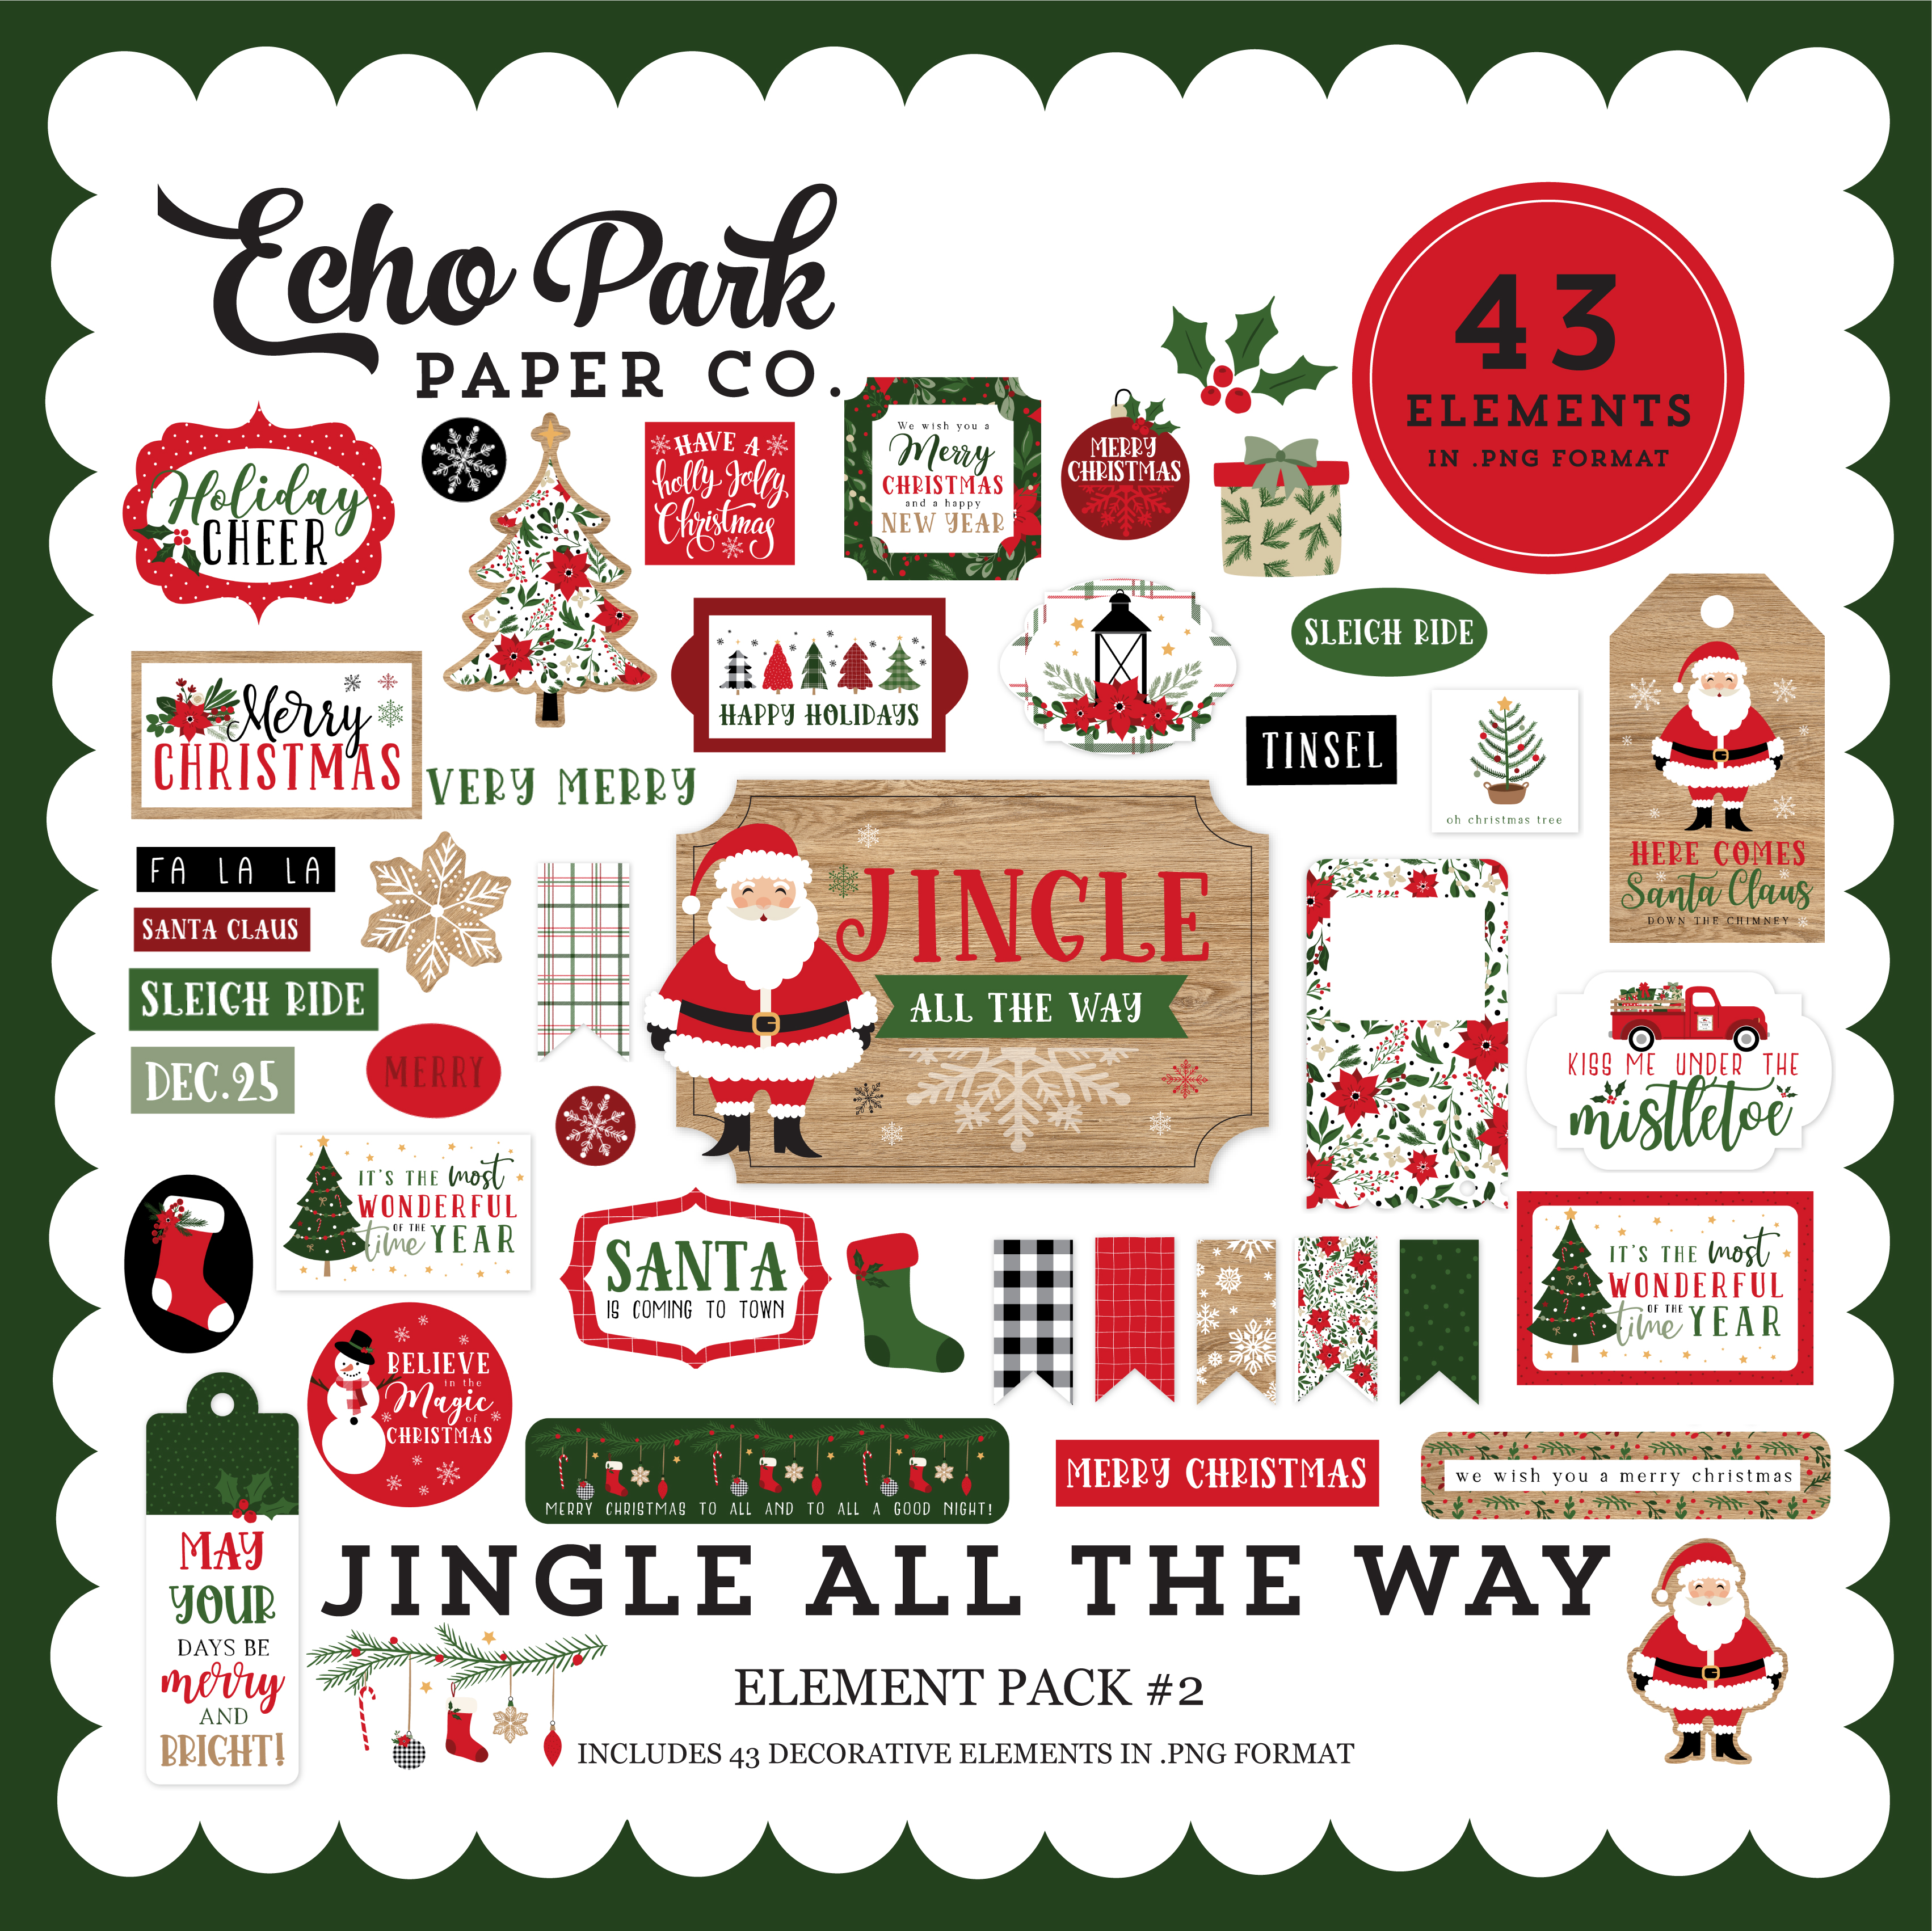 Jingle All The Way Element Pack #2